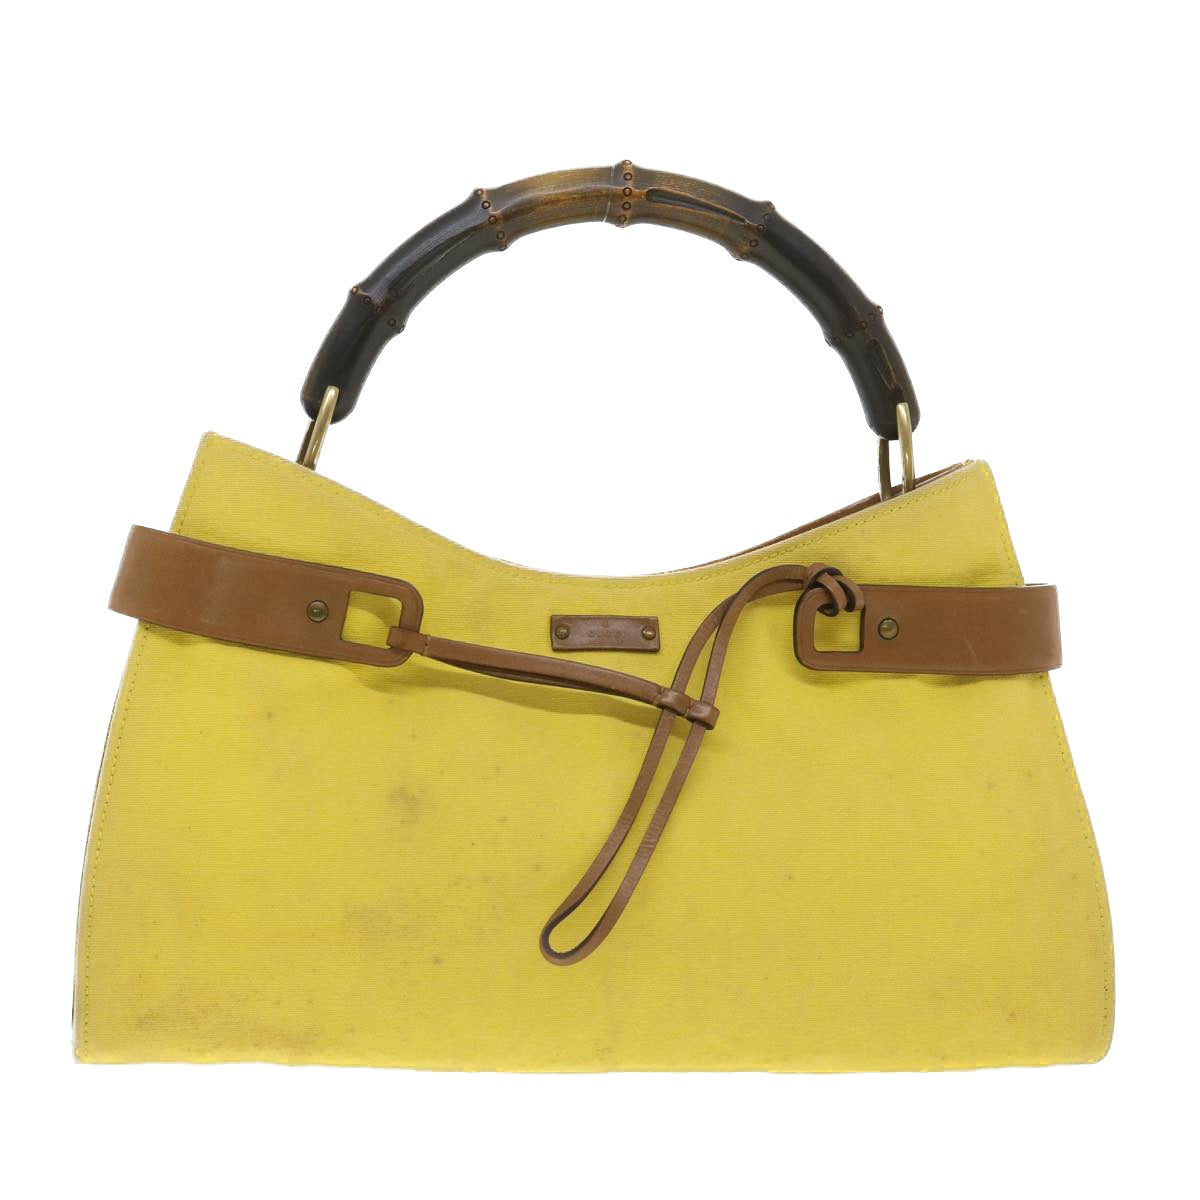 GUCCI Bamboo Shoulder Bag Canvas Yellow Auth 33904